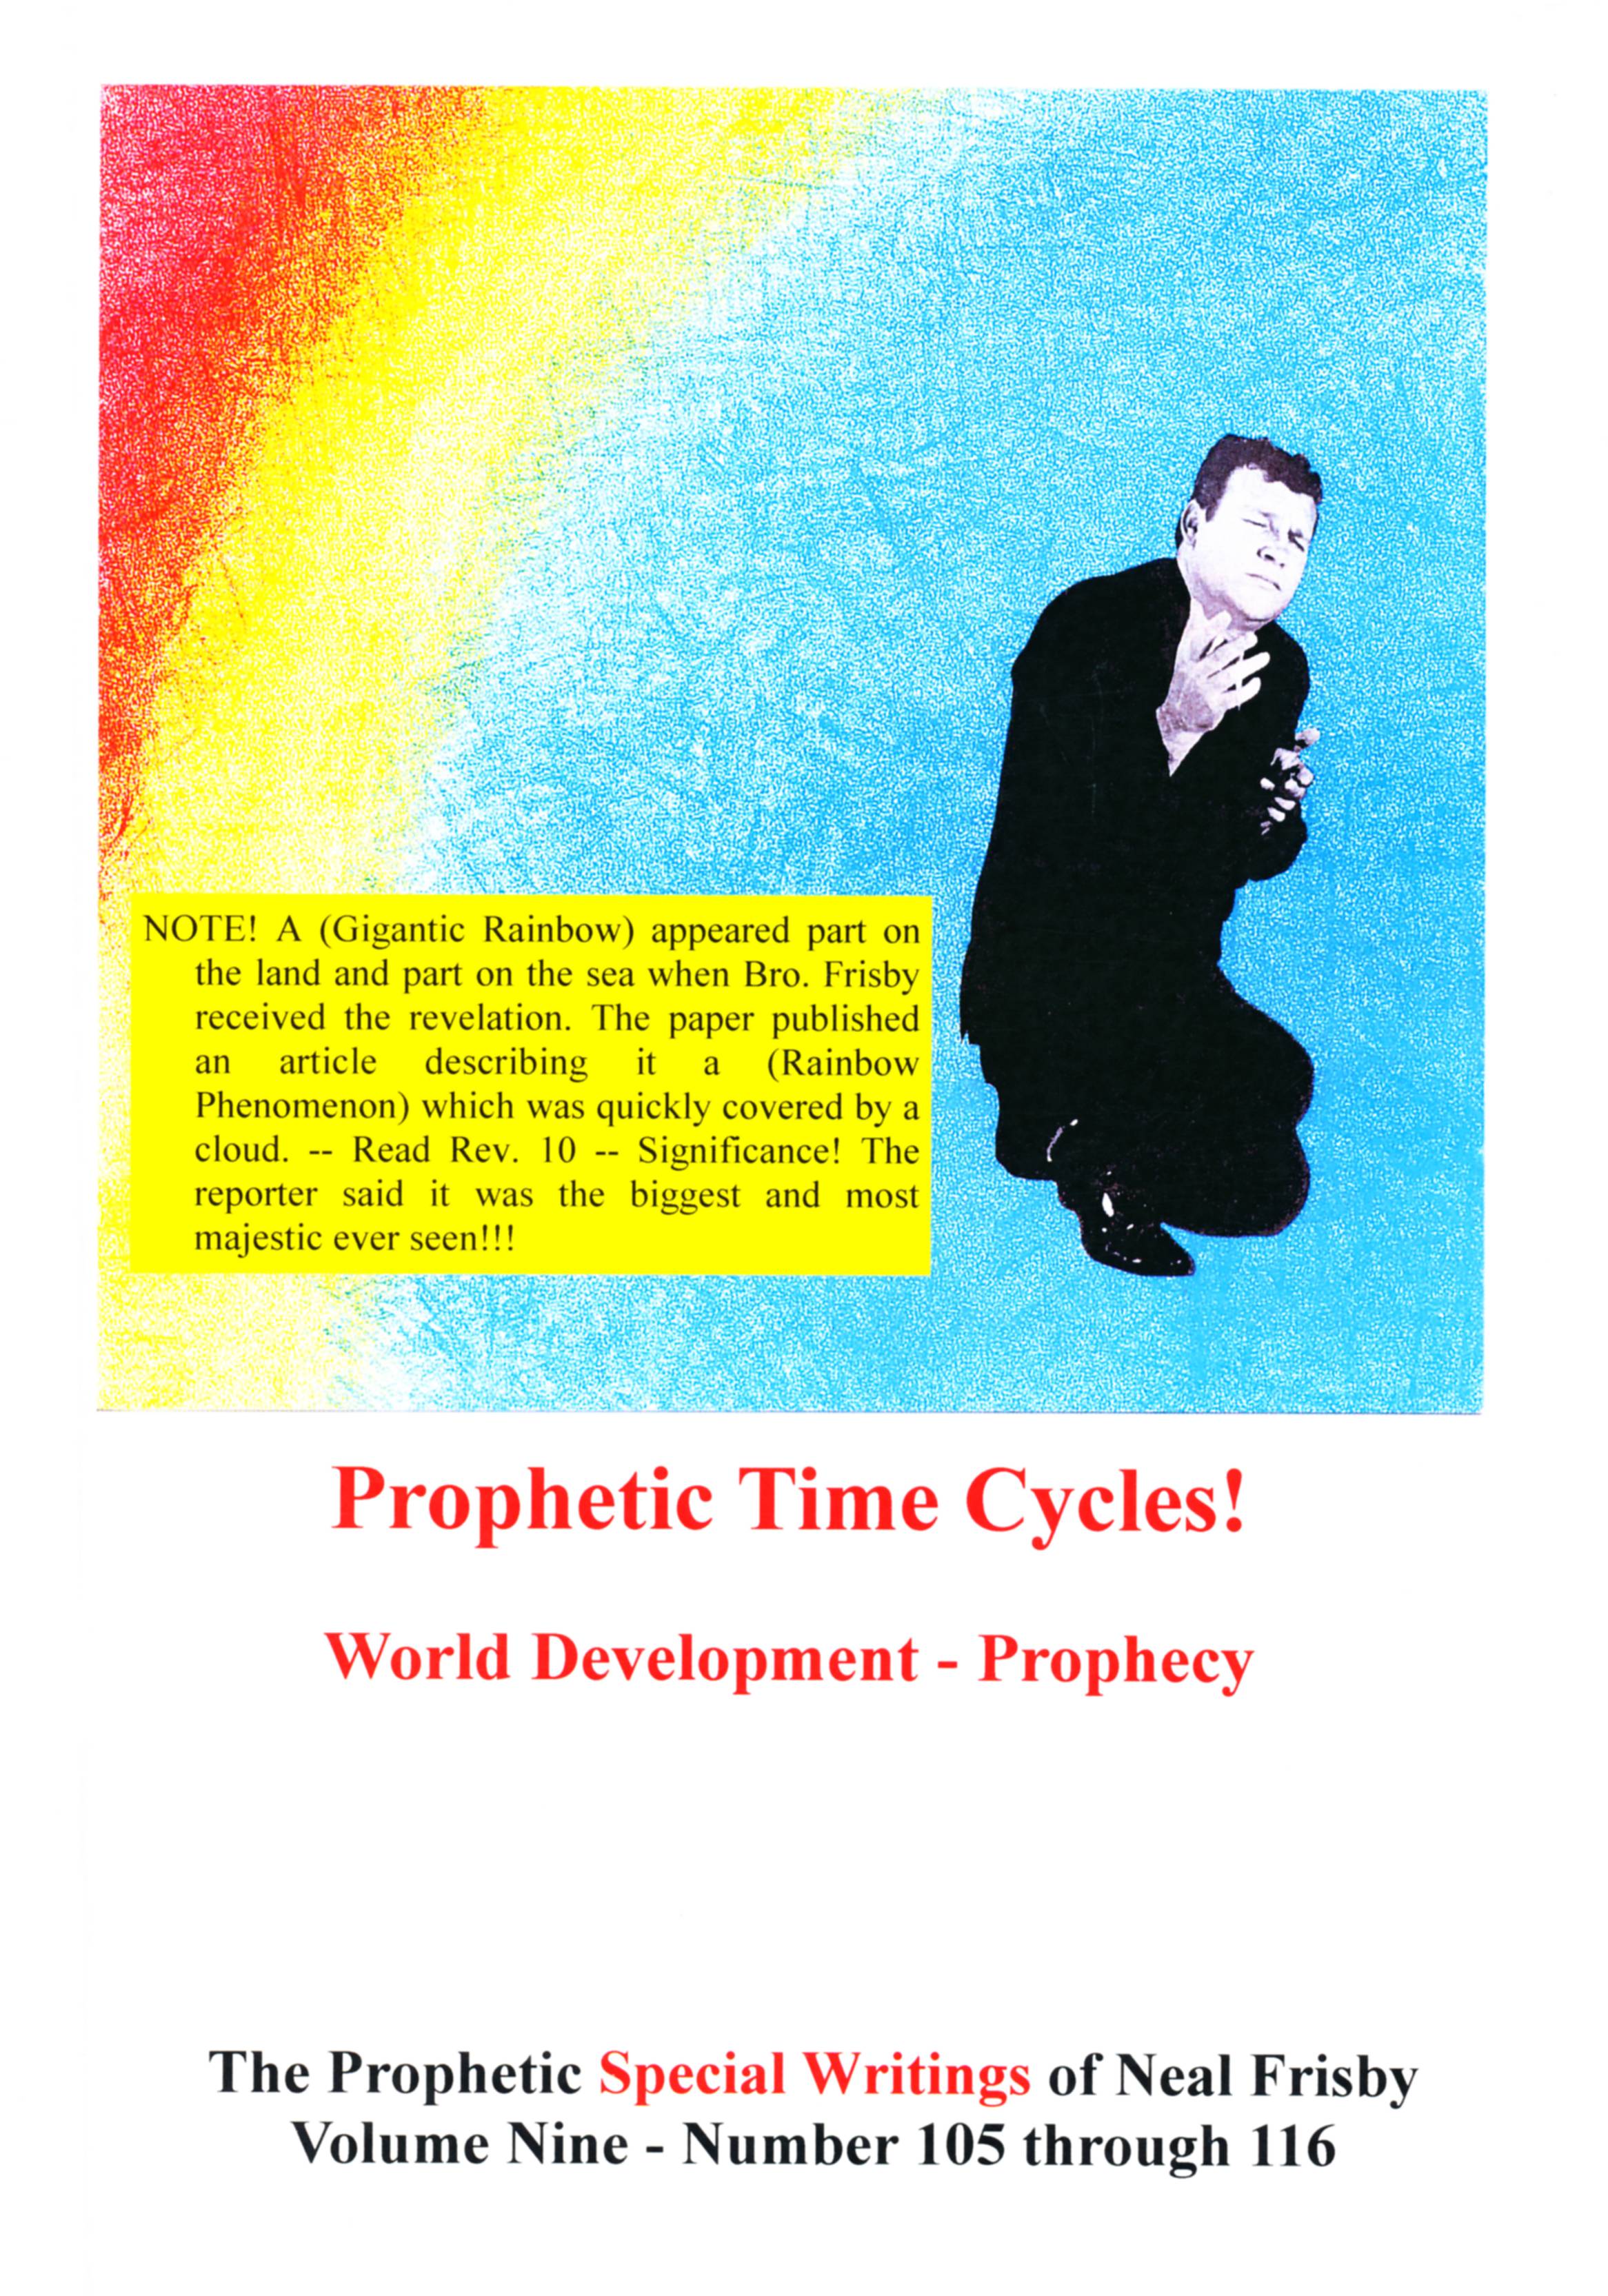 Volume 9 - Prophetic Time Cycles!